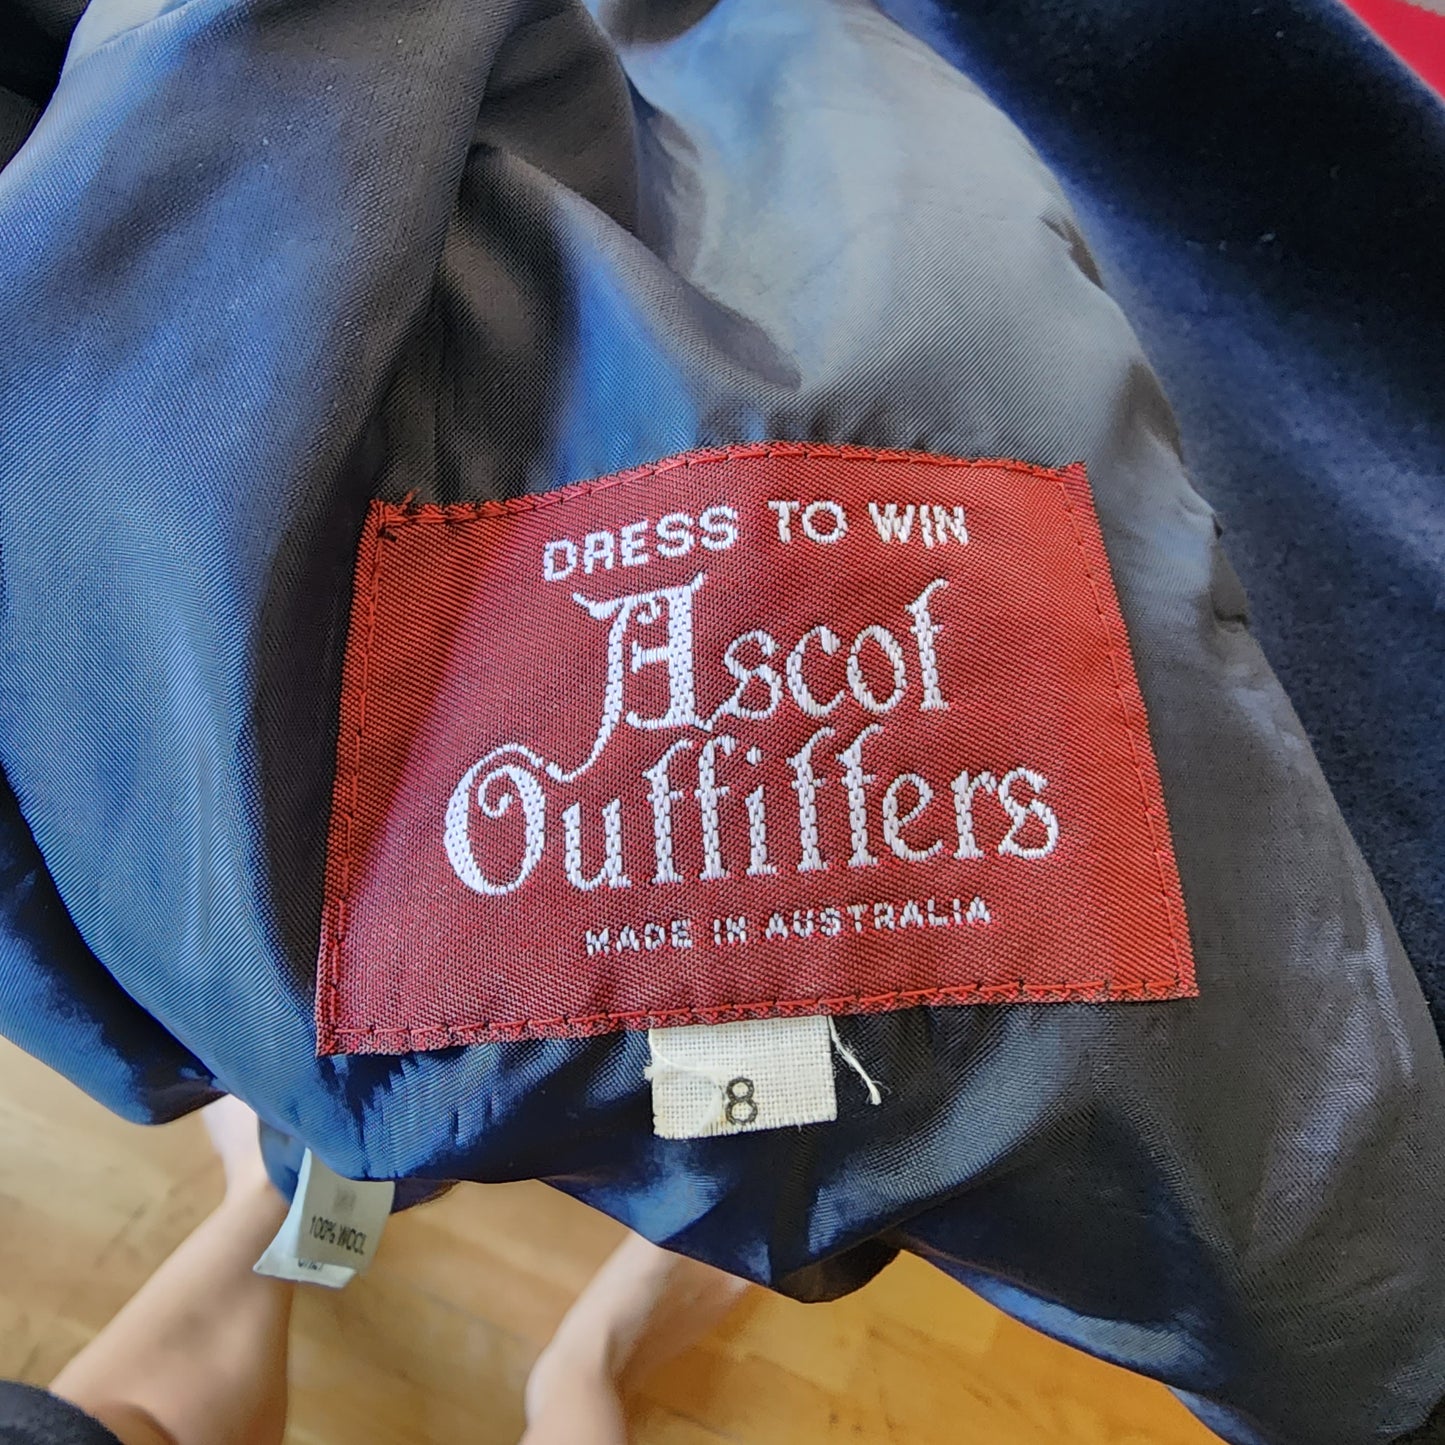 Ascott Outfitters ladies navy wool show jacket with velvet collar ladies size 6